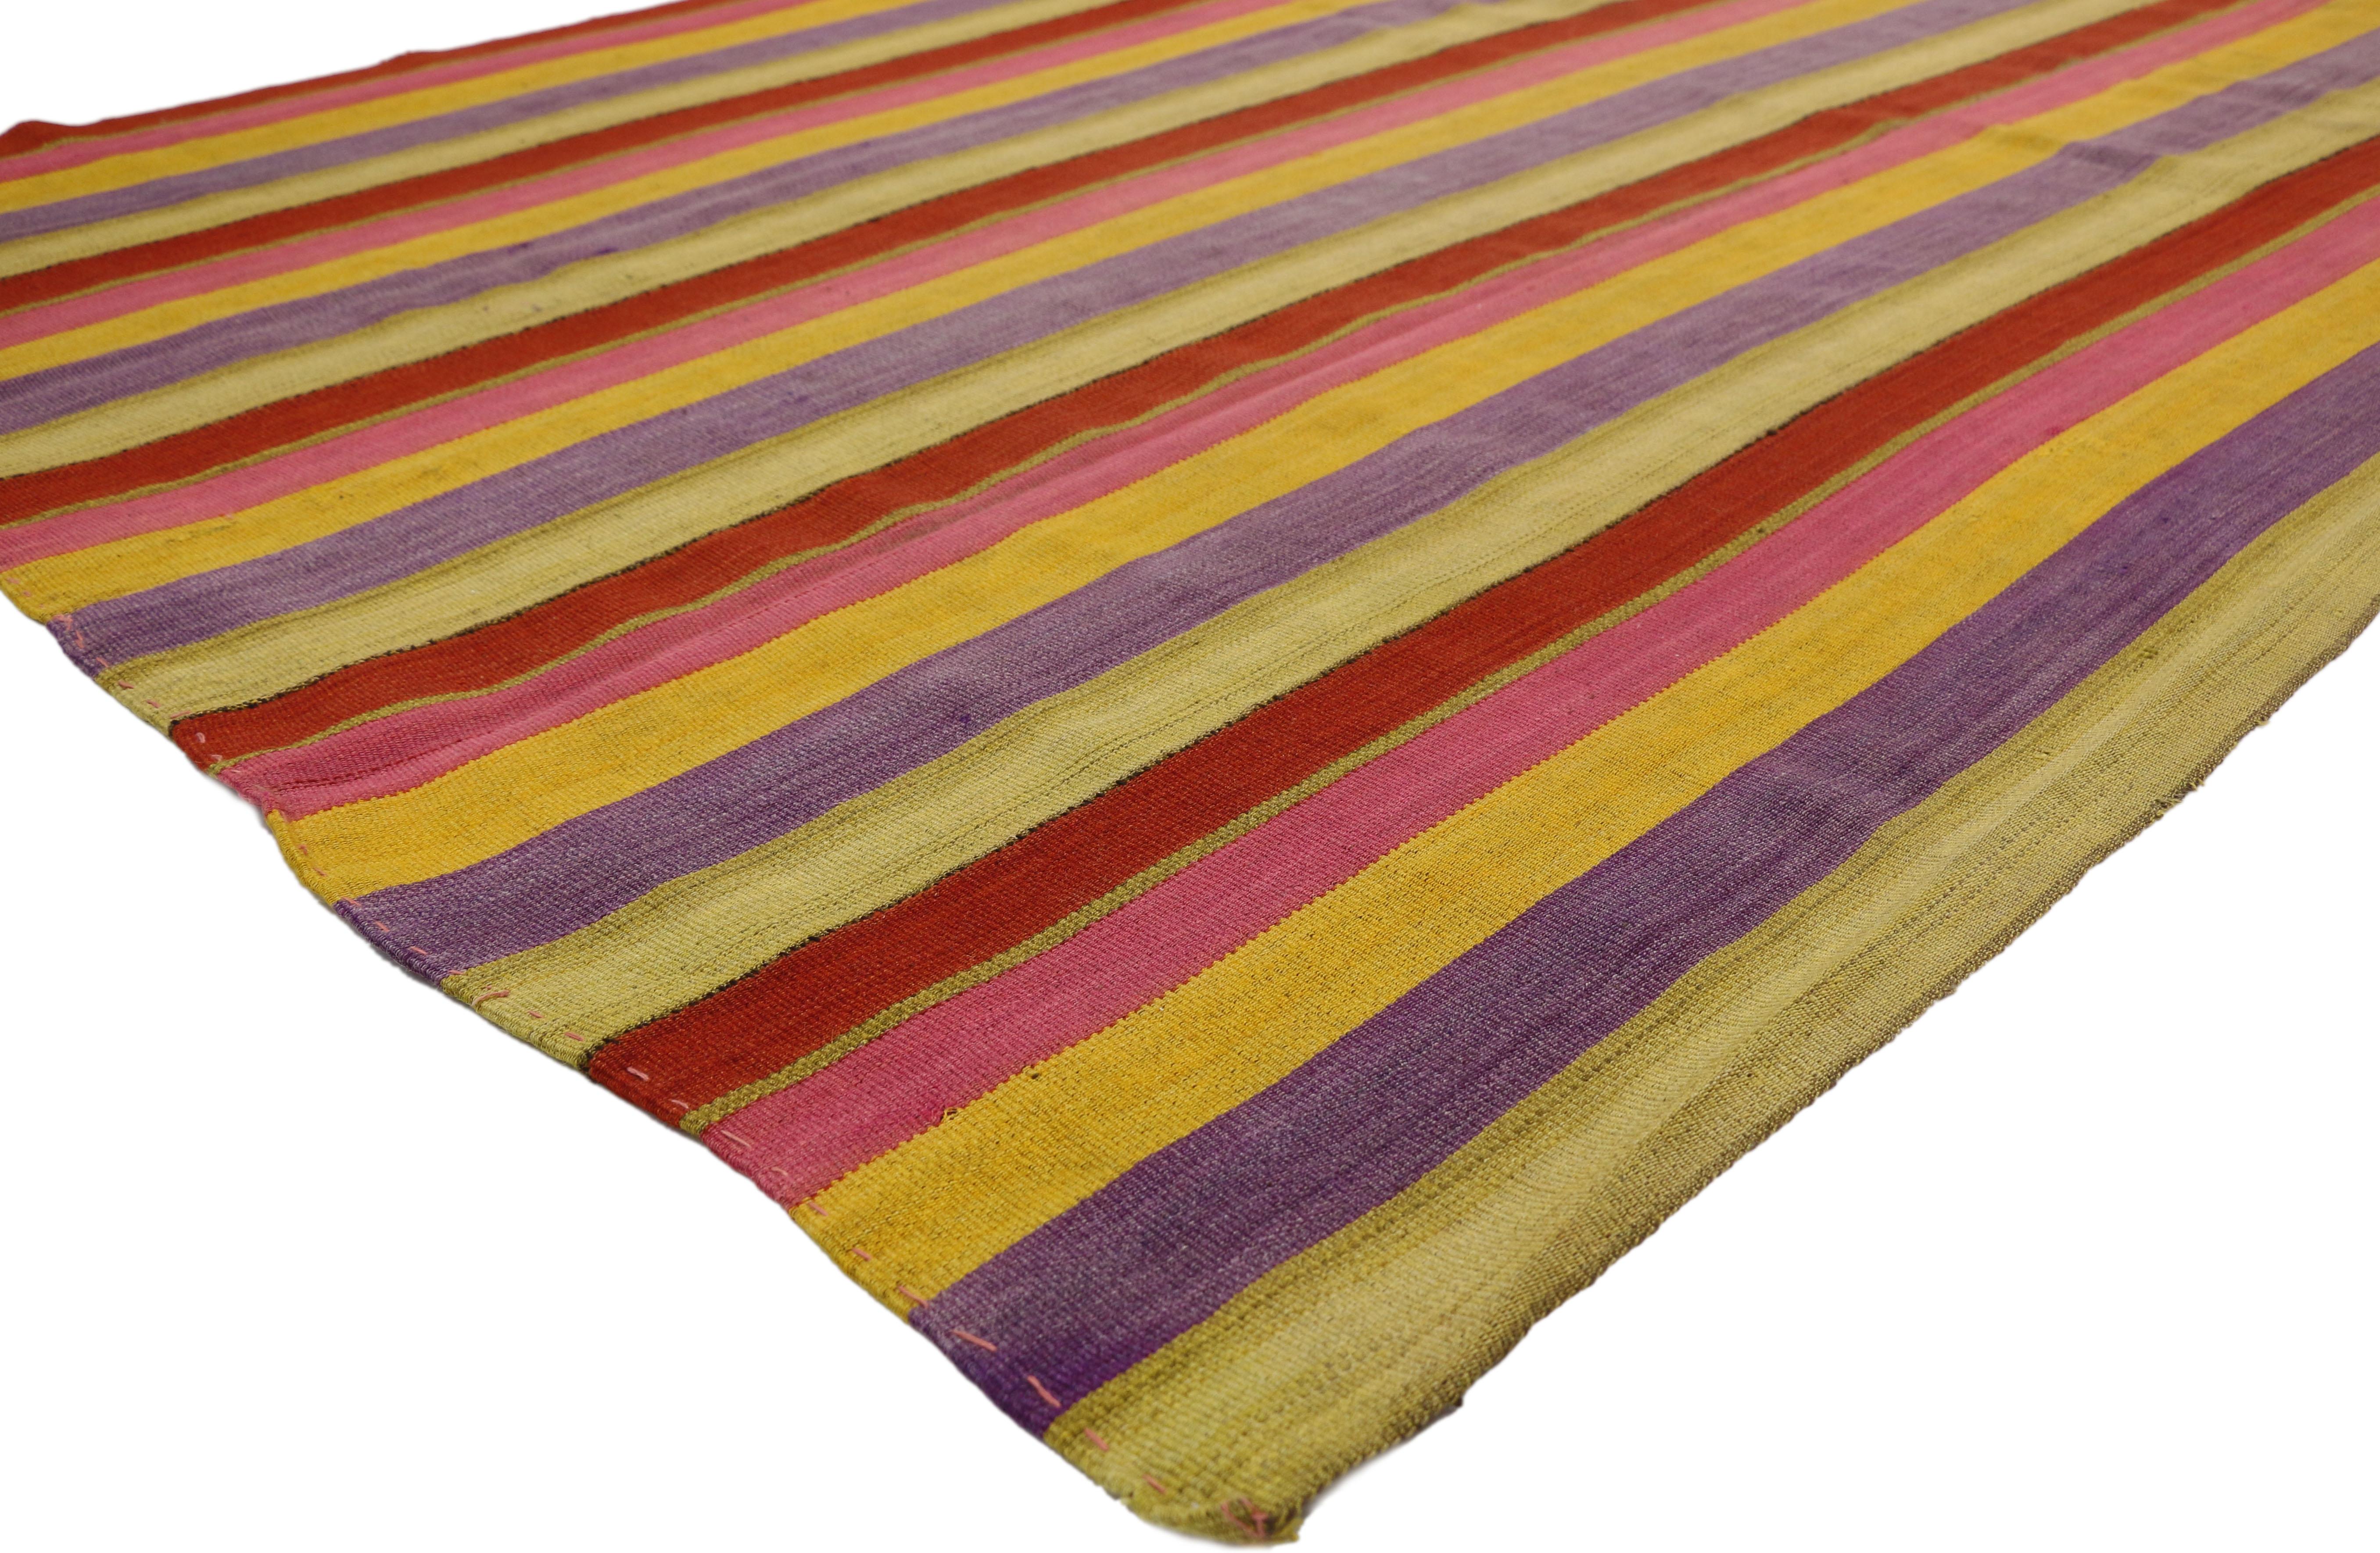 51553, vintage Turkish Striped Kilim rug with Modern style, Striped Area rug. A bold expressive design combined with vibrant colors reminiscent of Mexico, this hand-woven wool vintage Turkish striped Kilim rug is a captivating vision of woven